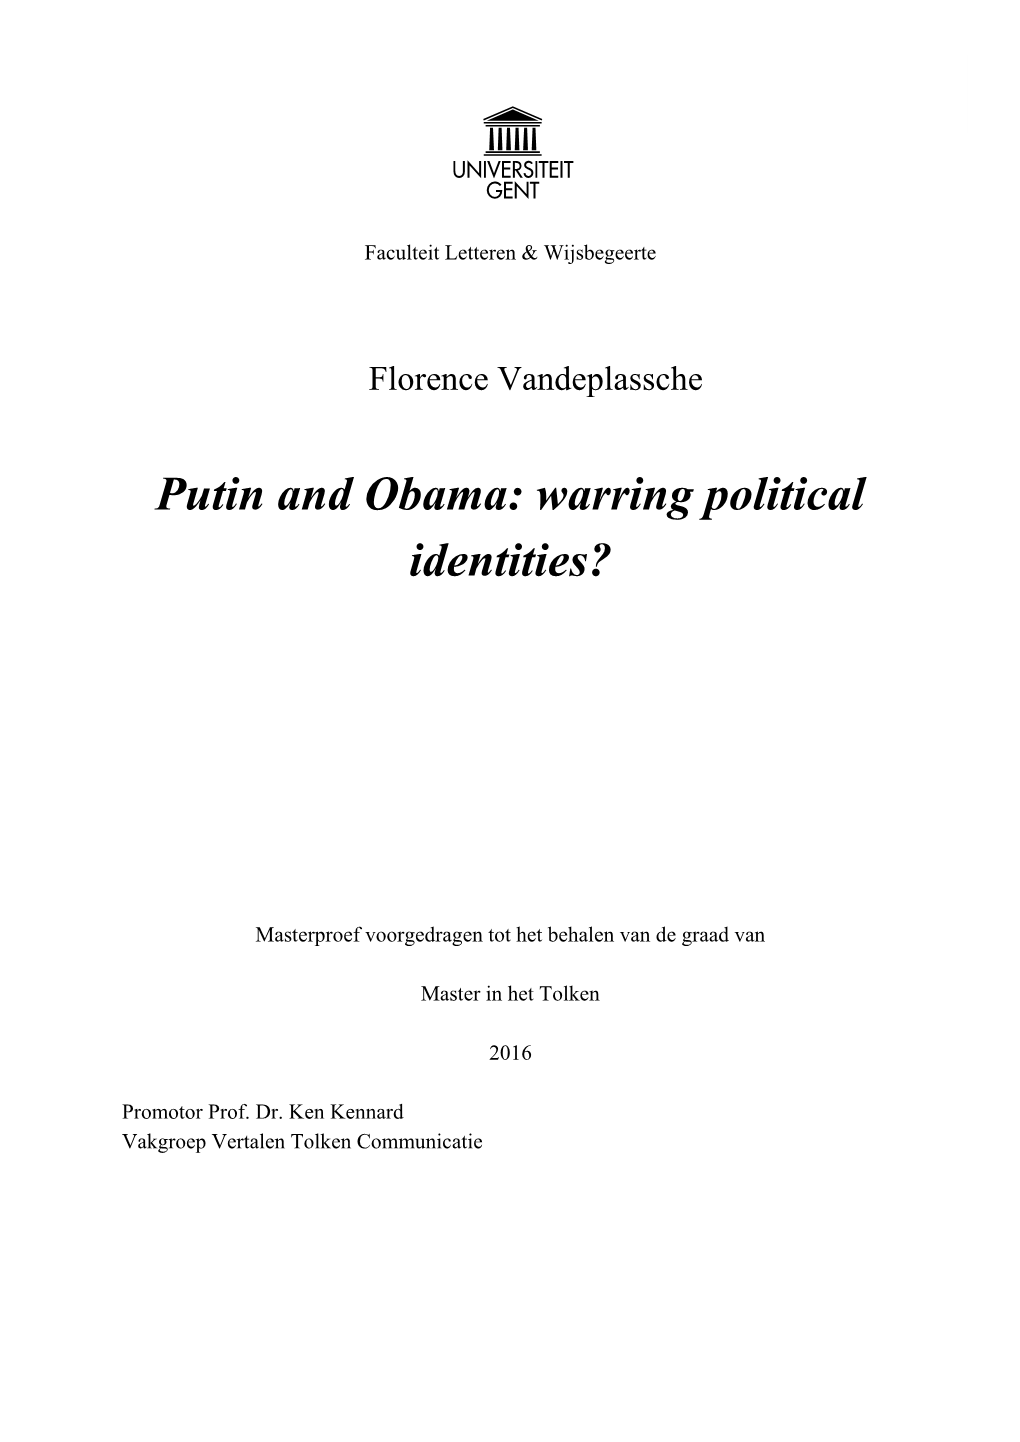 Putin and Obama: Warring Political Identities?